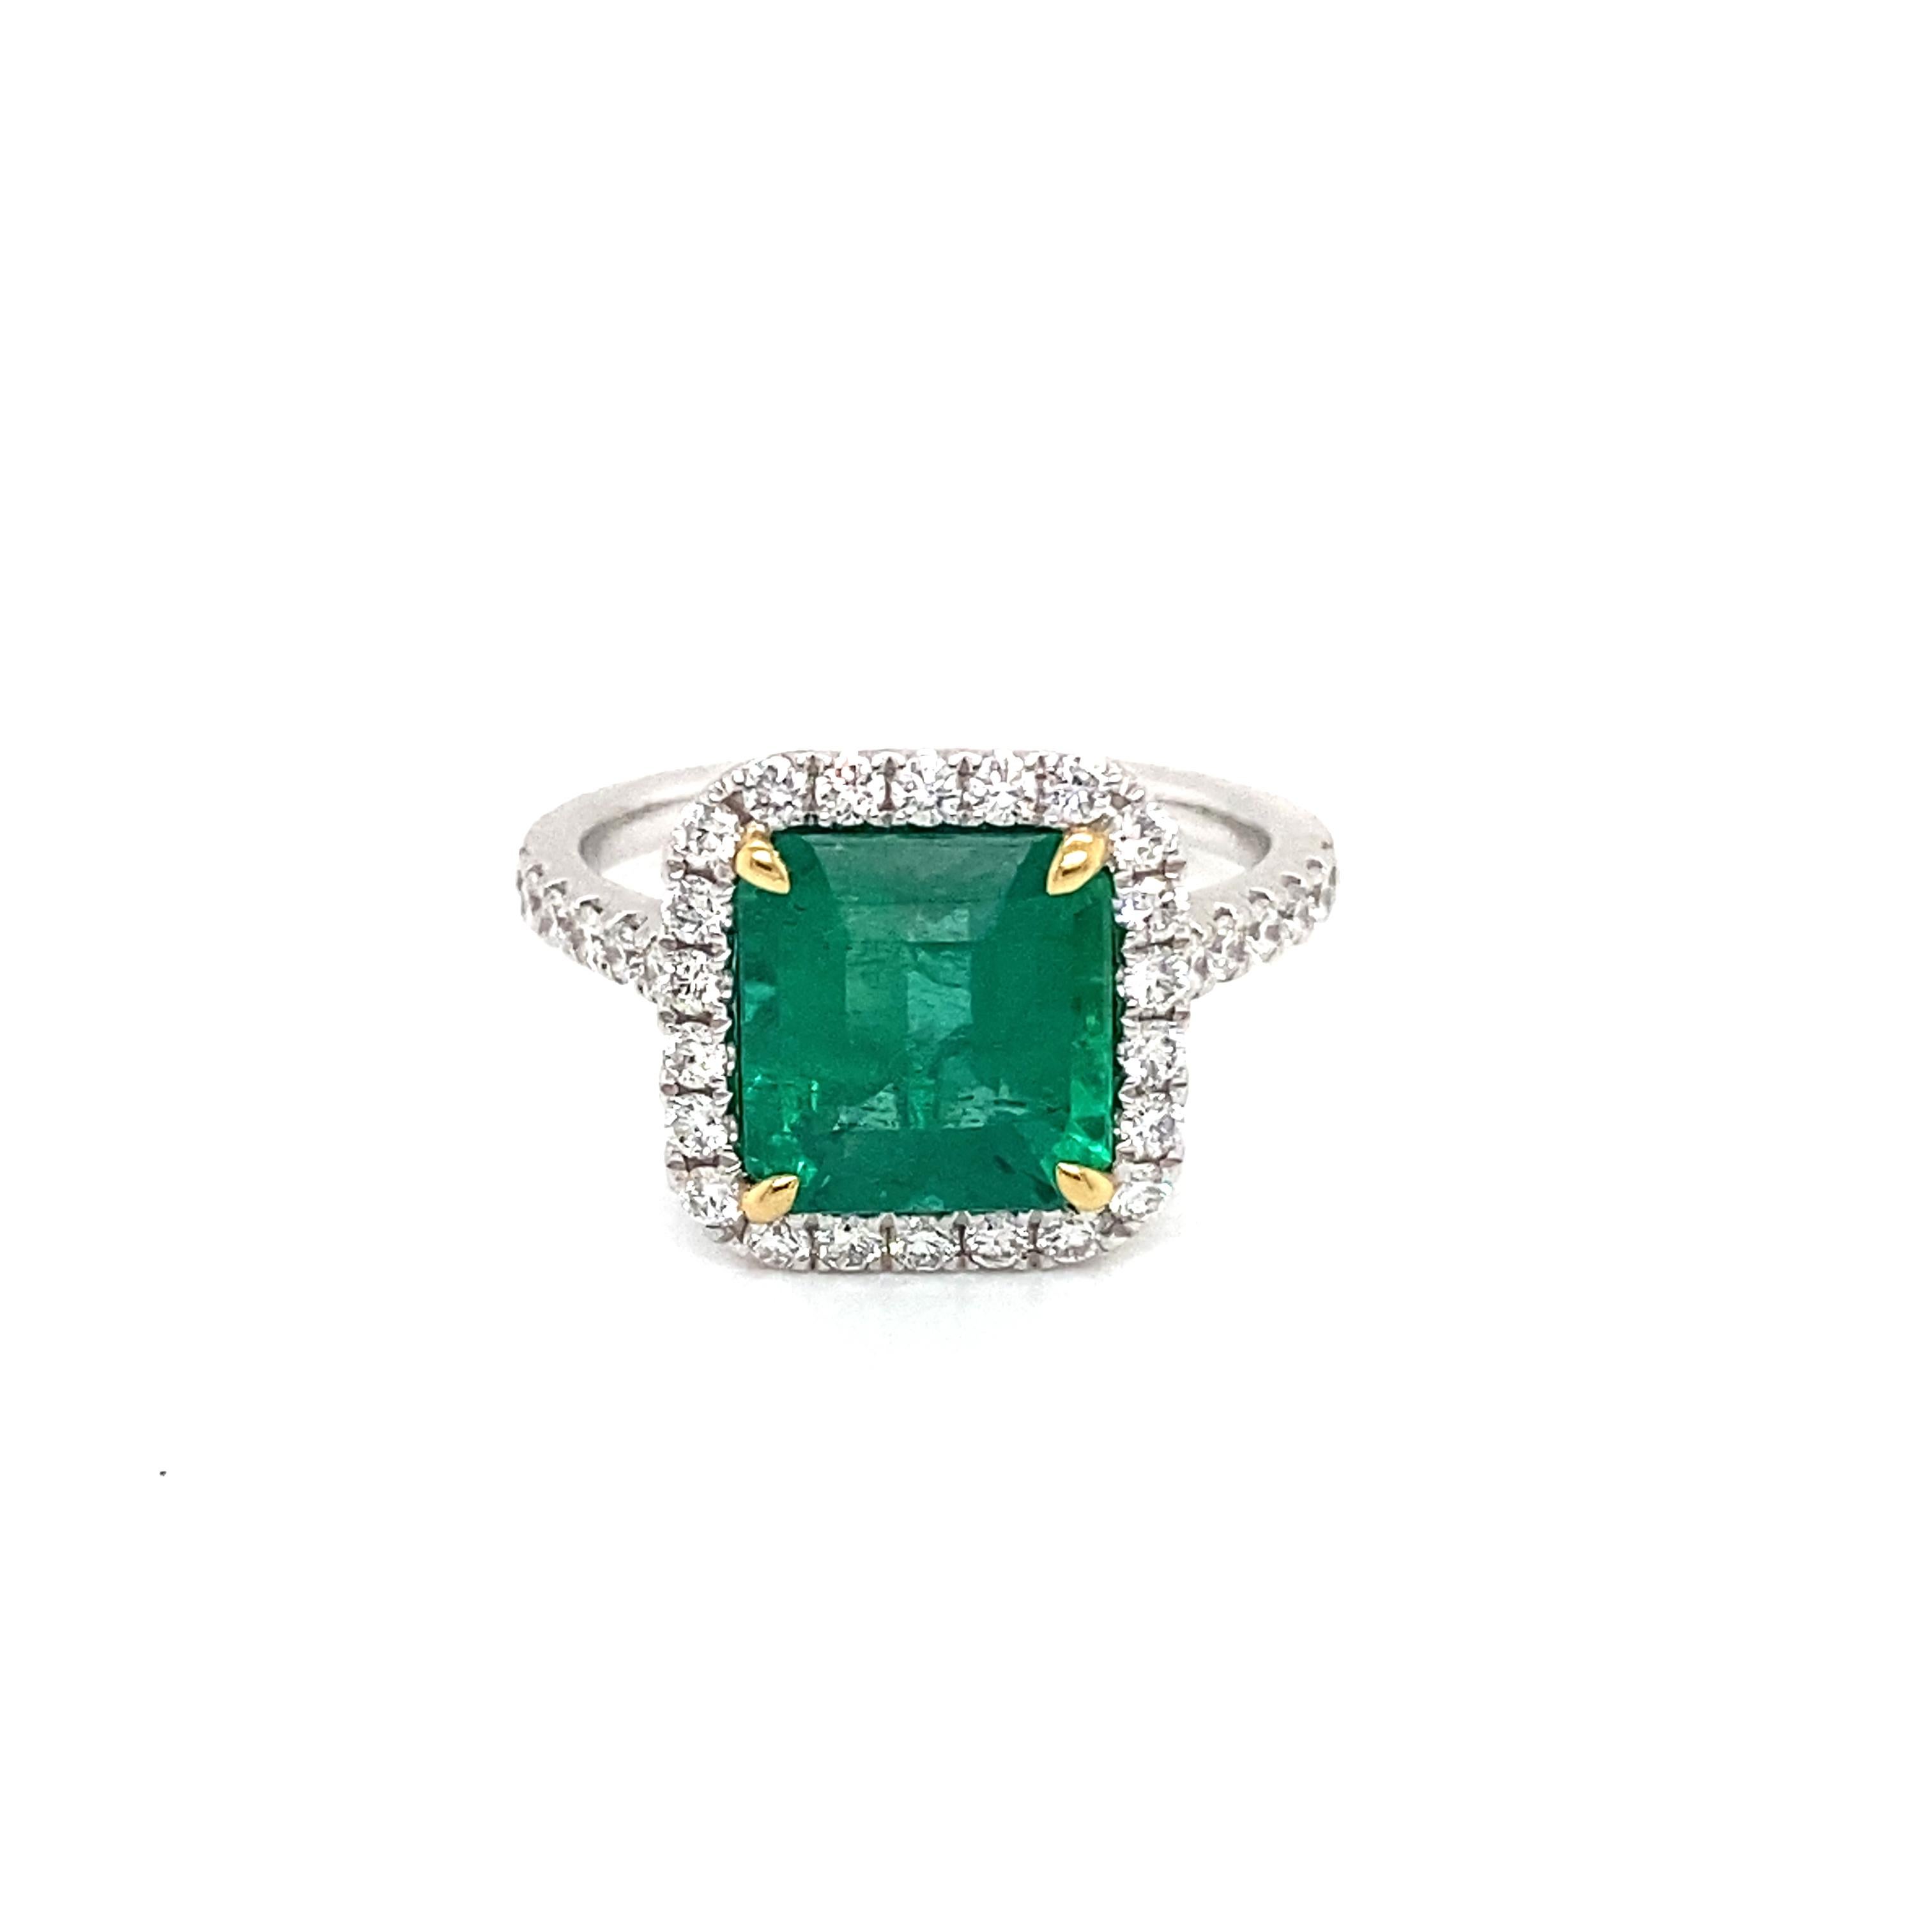 This stunning Cocktail Ring features a beautiful 2.90 Carat Emerald Cut Emerald with a Diamond Halo, that sits on a Diamond Shank. 
This Ring is set in Platinum with 18K Yellow Gold prongs on the center stone. 
Total Diamond Weight = 0.57 carats.